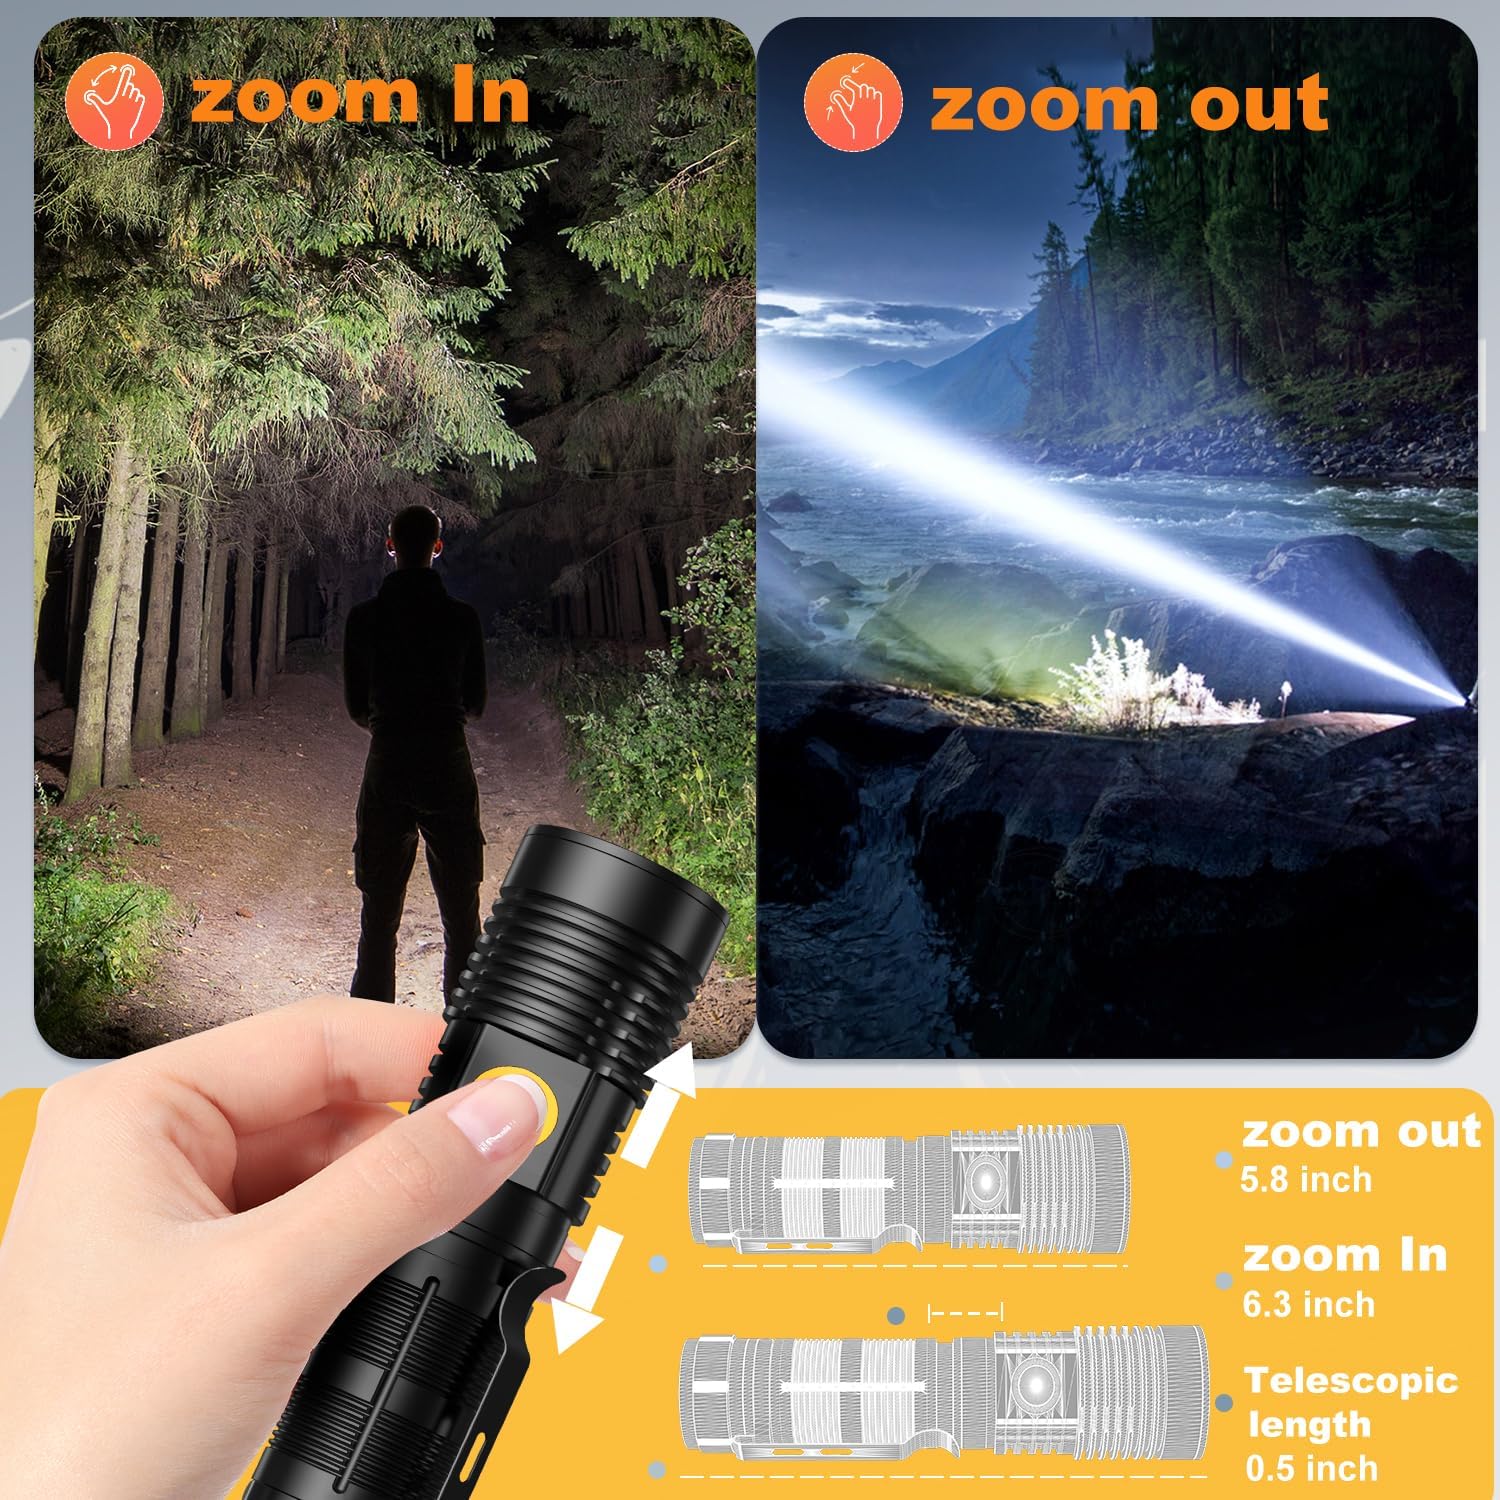 Small Tactical Flashlights 20000 High Lumens - 1500 Meters Long Beam Super Bright LED Magnetic Flashlight USB Rechargeable Zoomable 5Modes Long Beam Spotlight Flashlight for Hiking, Camping